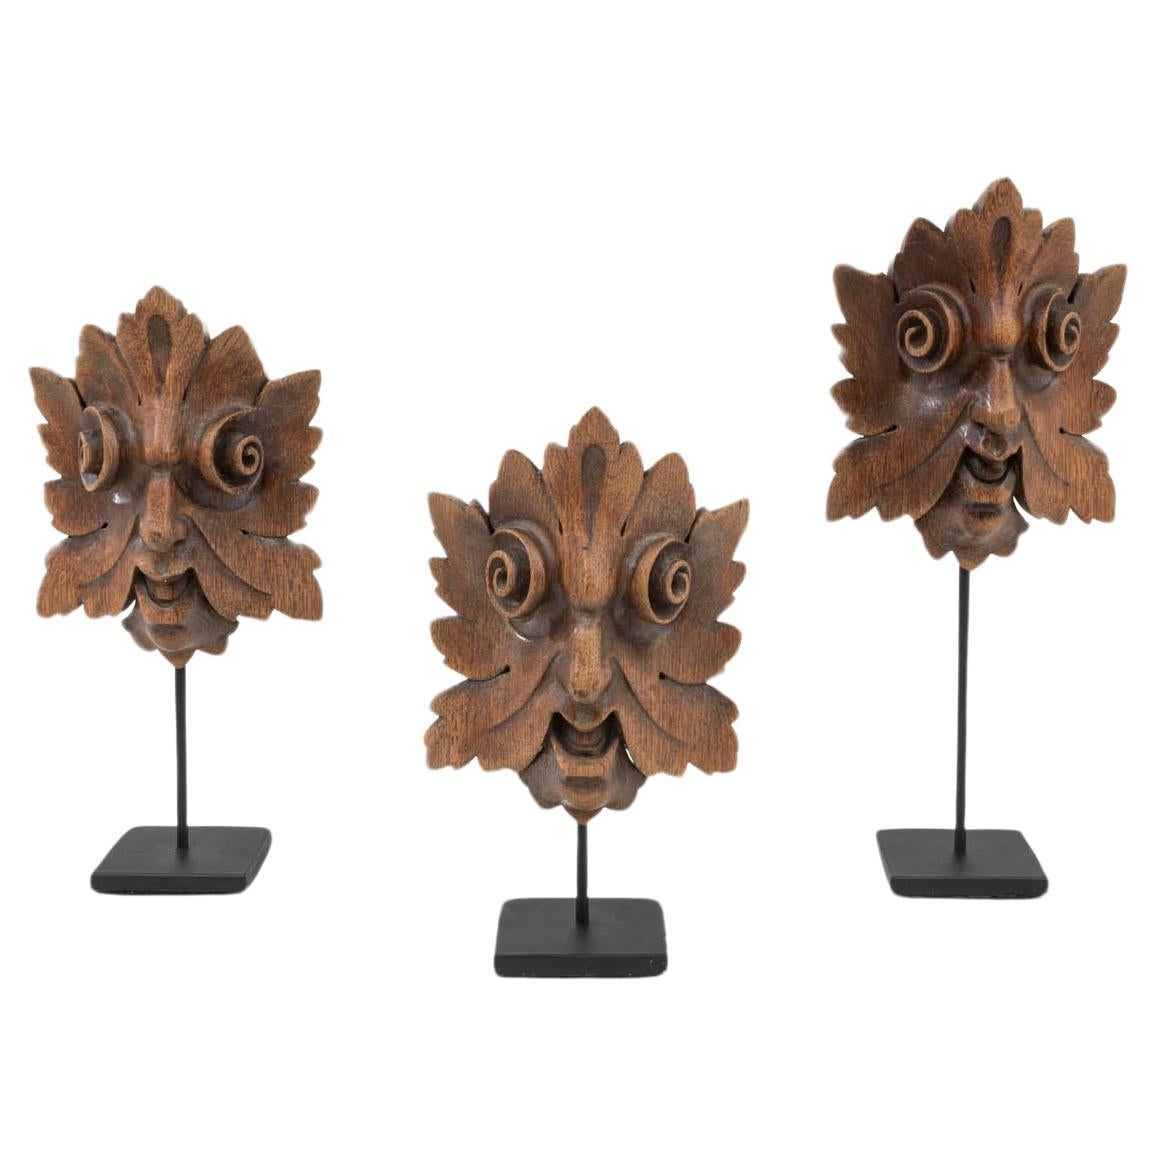 19th Century French Wooden Decoration on Metal Stand, Set of 3